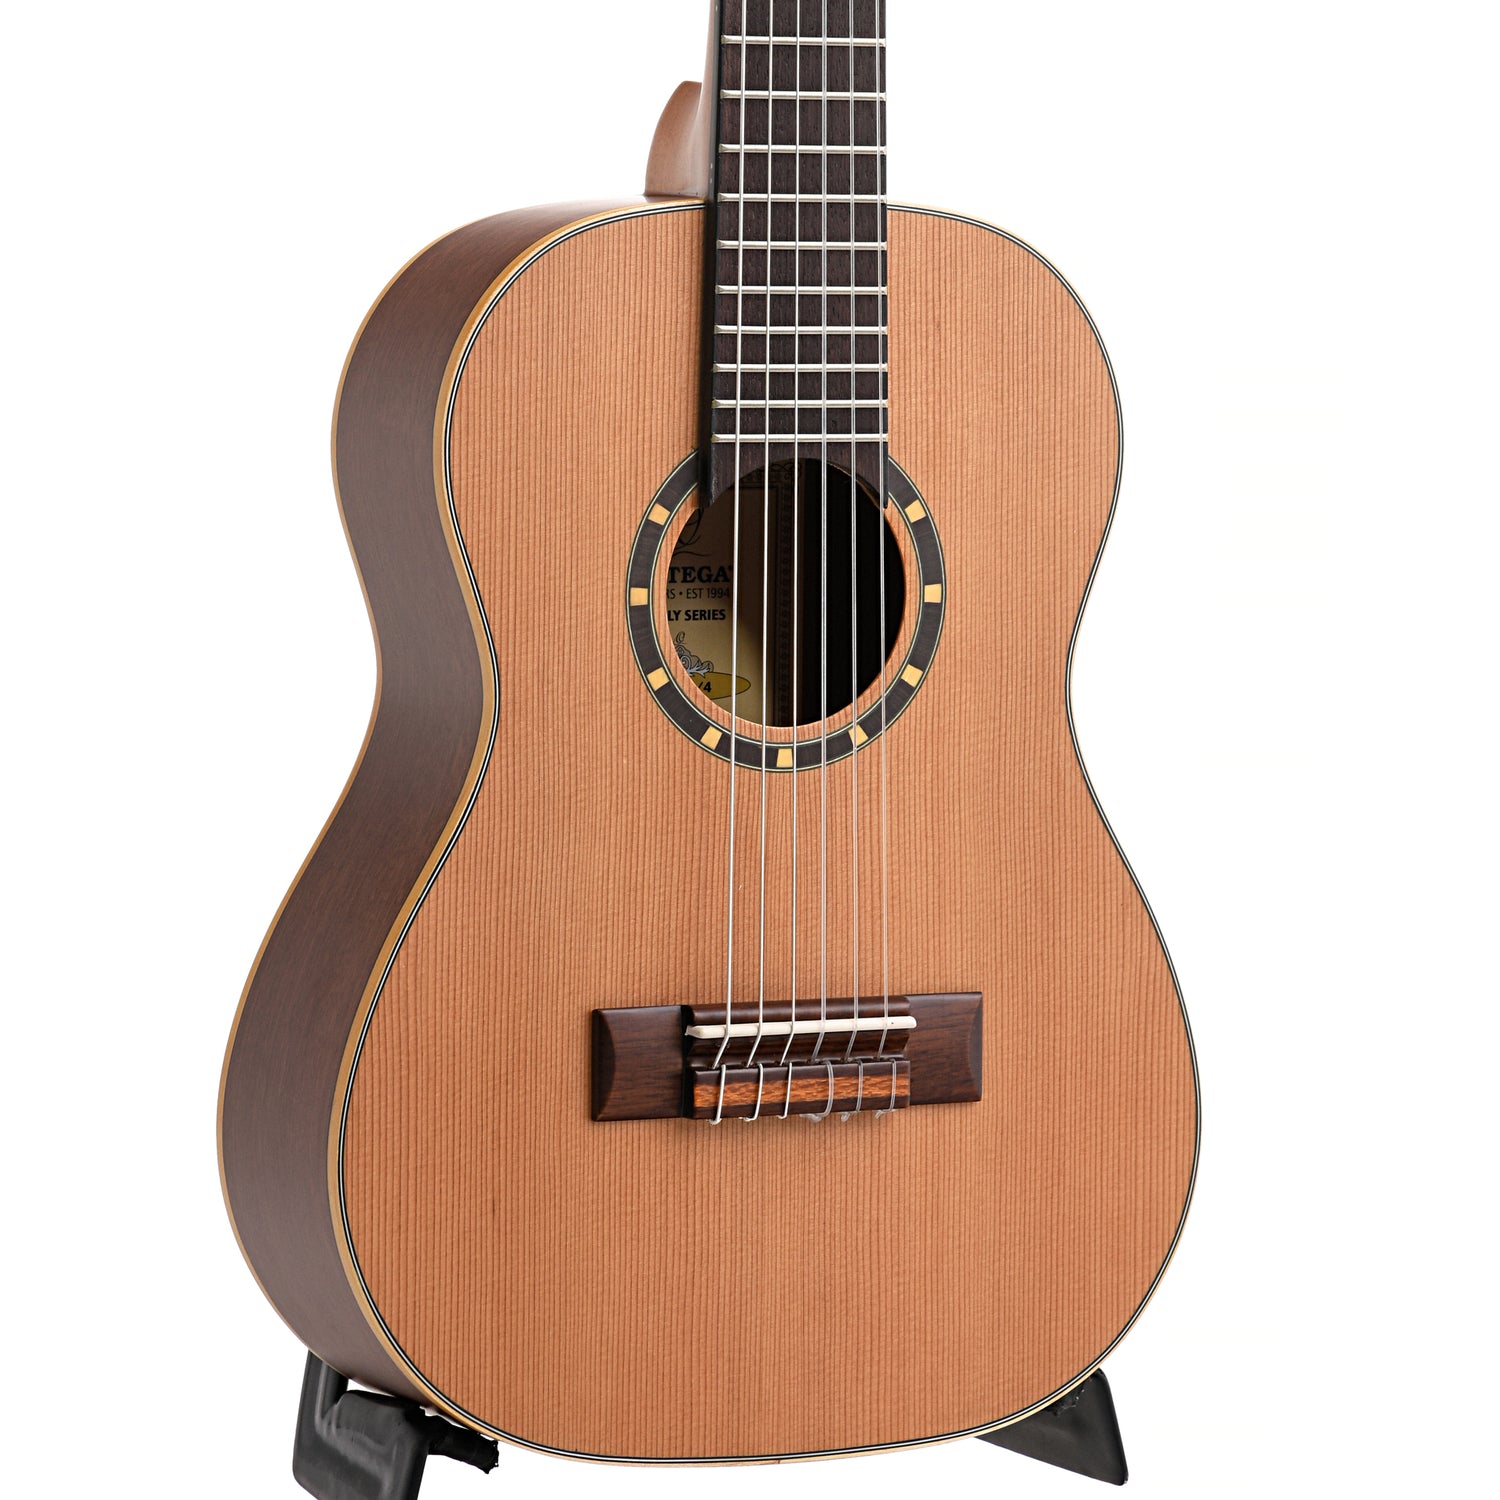 Image 5 of Ortega Family Series Pro R122-1/4 Classical Guitar, 1/4 size - SKU# R122-1/4 : Product Type Classical & Flamenco Guitars : Elderly Instruments